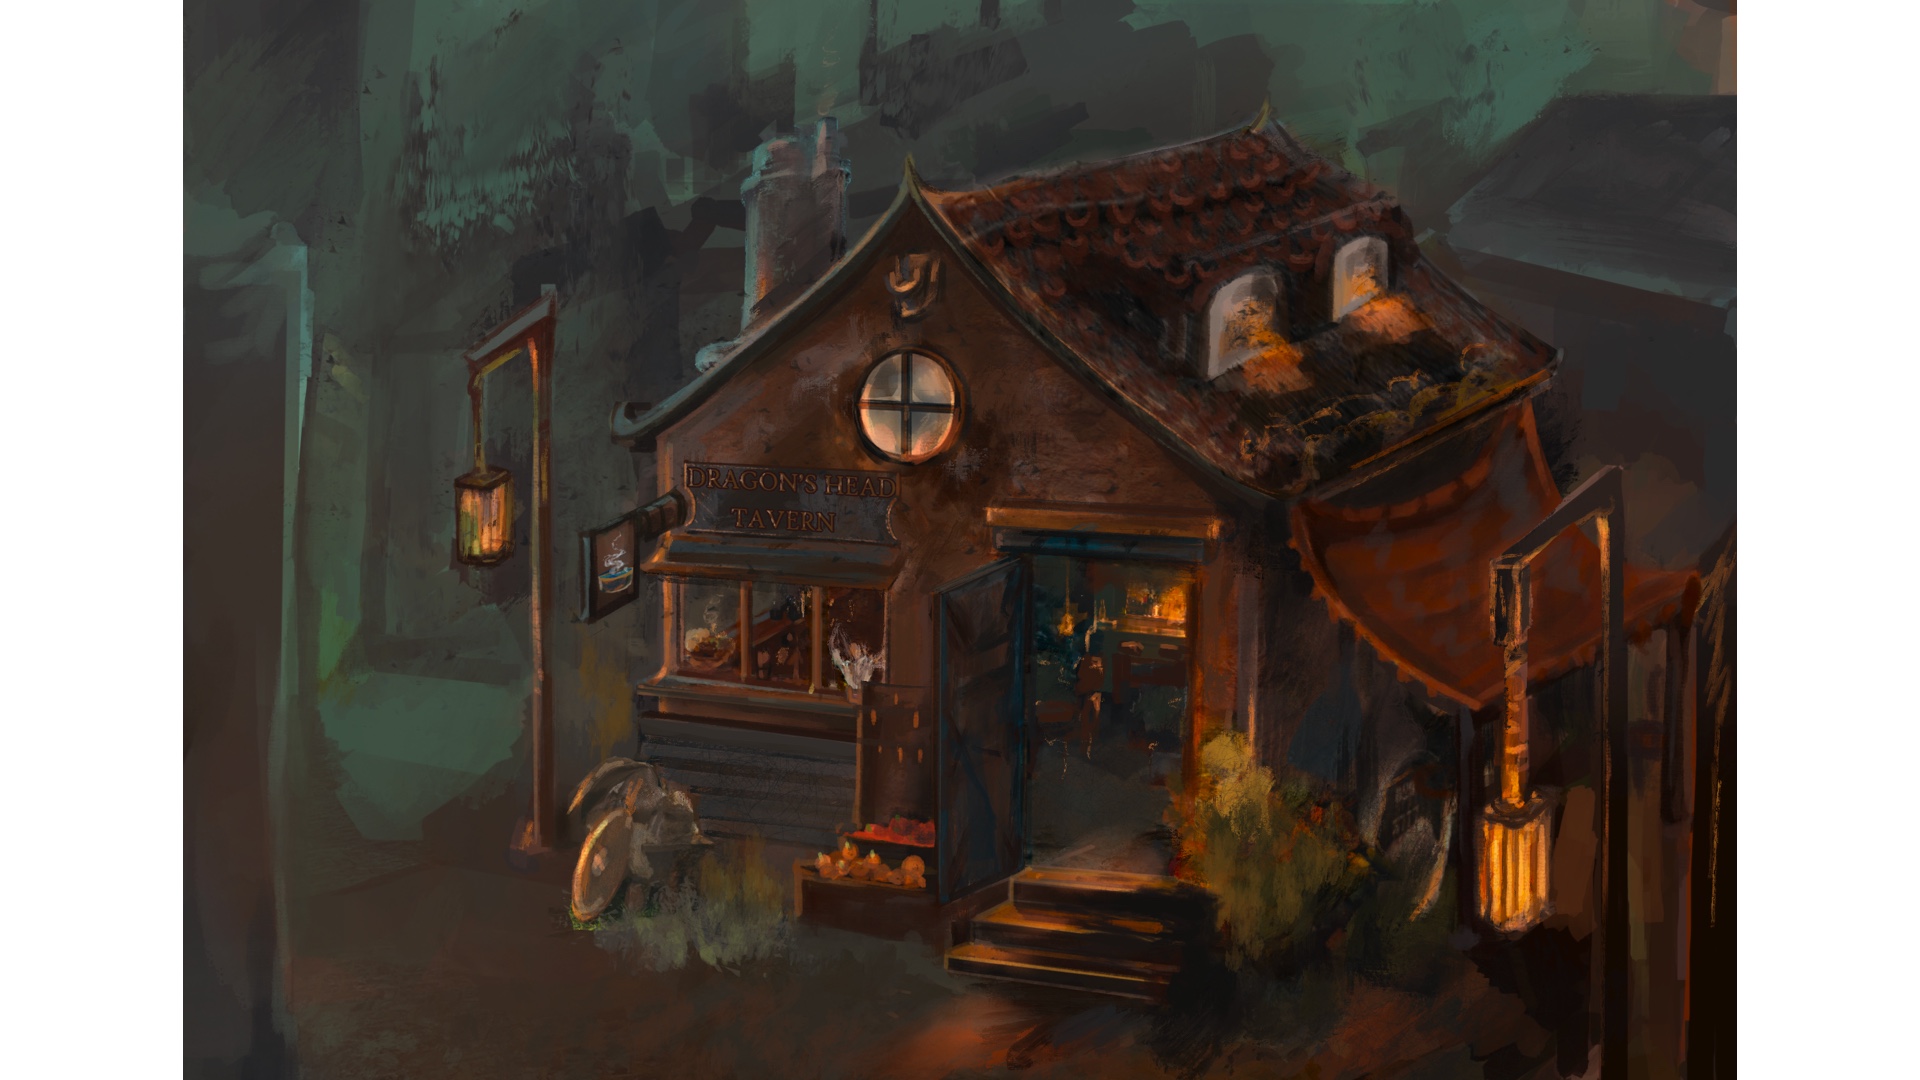 A digital painting of a town environment featuring a tavern called The Dragon's Head